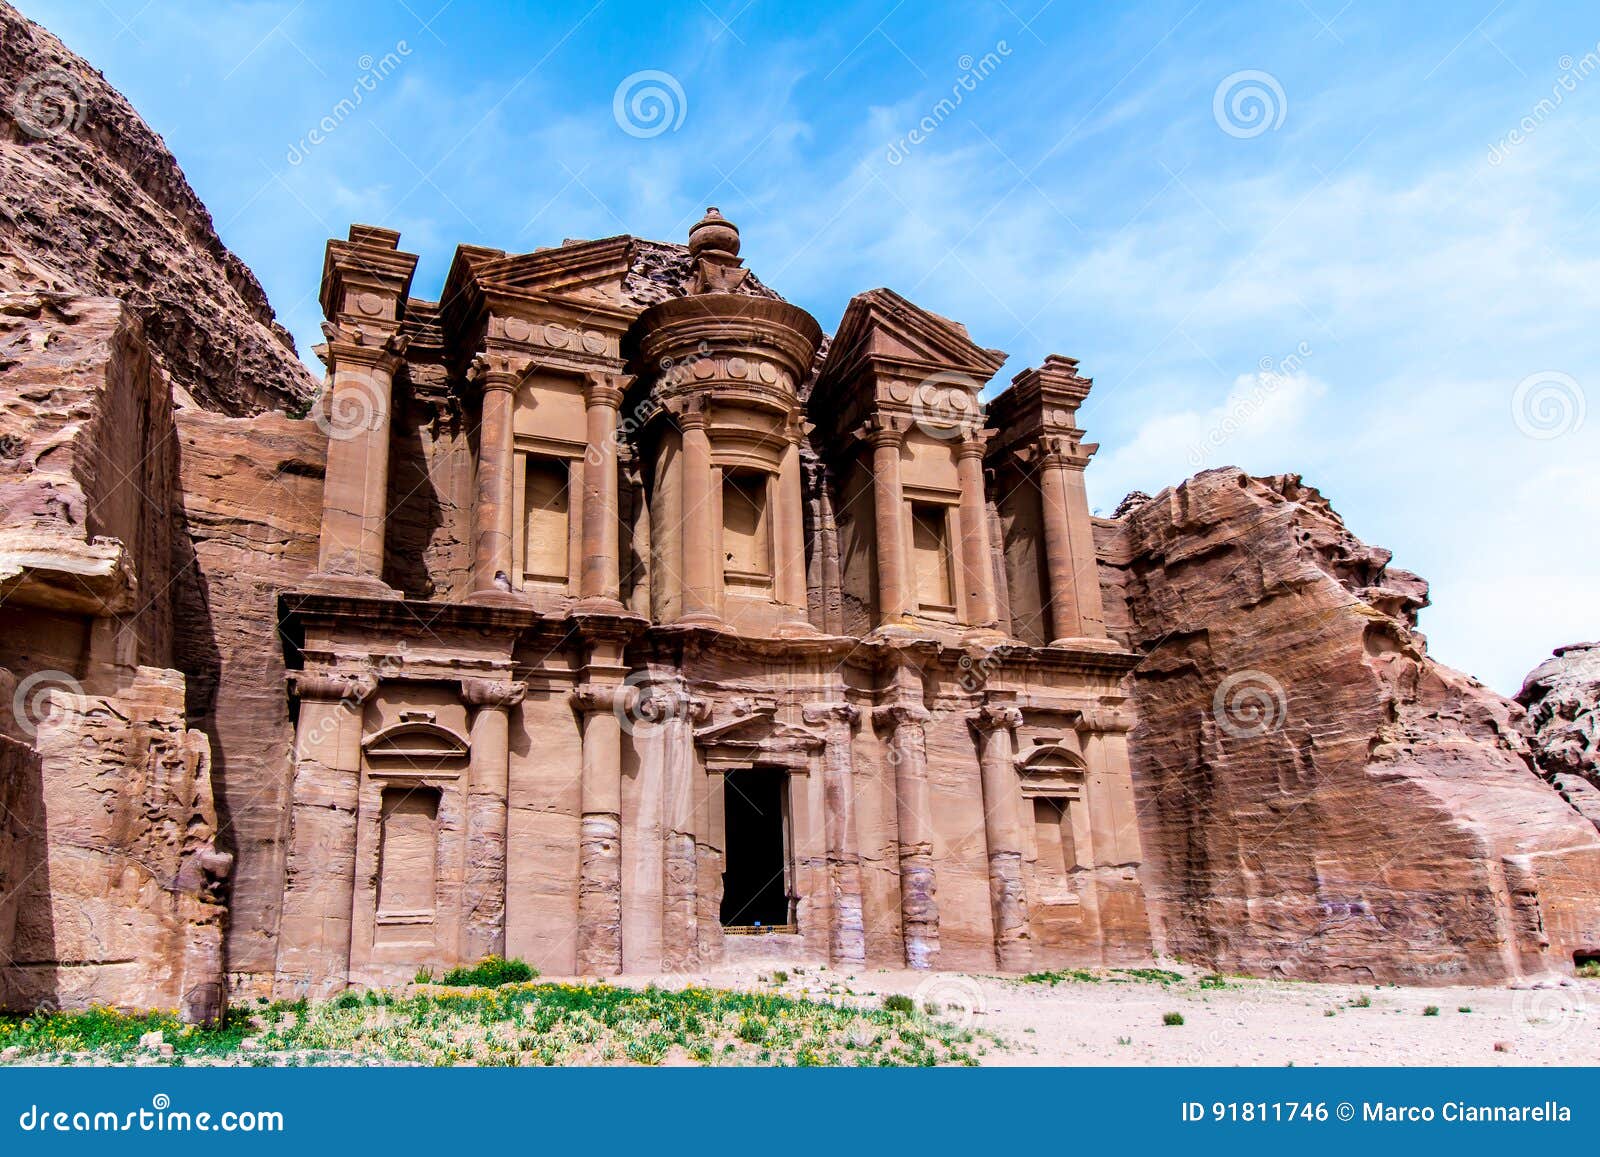 Ancient times Metaphor Blacken The Monastery, a Building Carved Out of Rock in the Ancient Petra, Jordan  Stock Photo - Image of middle, east: 91811746